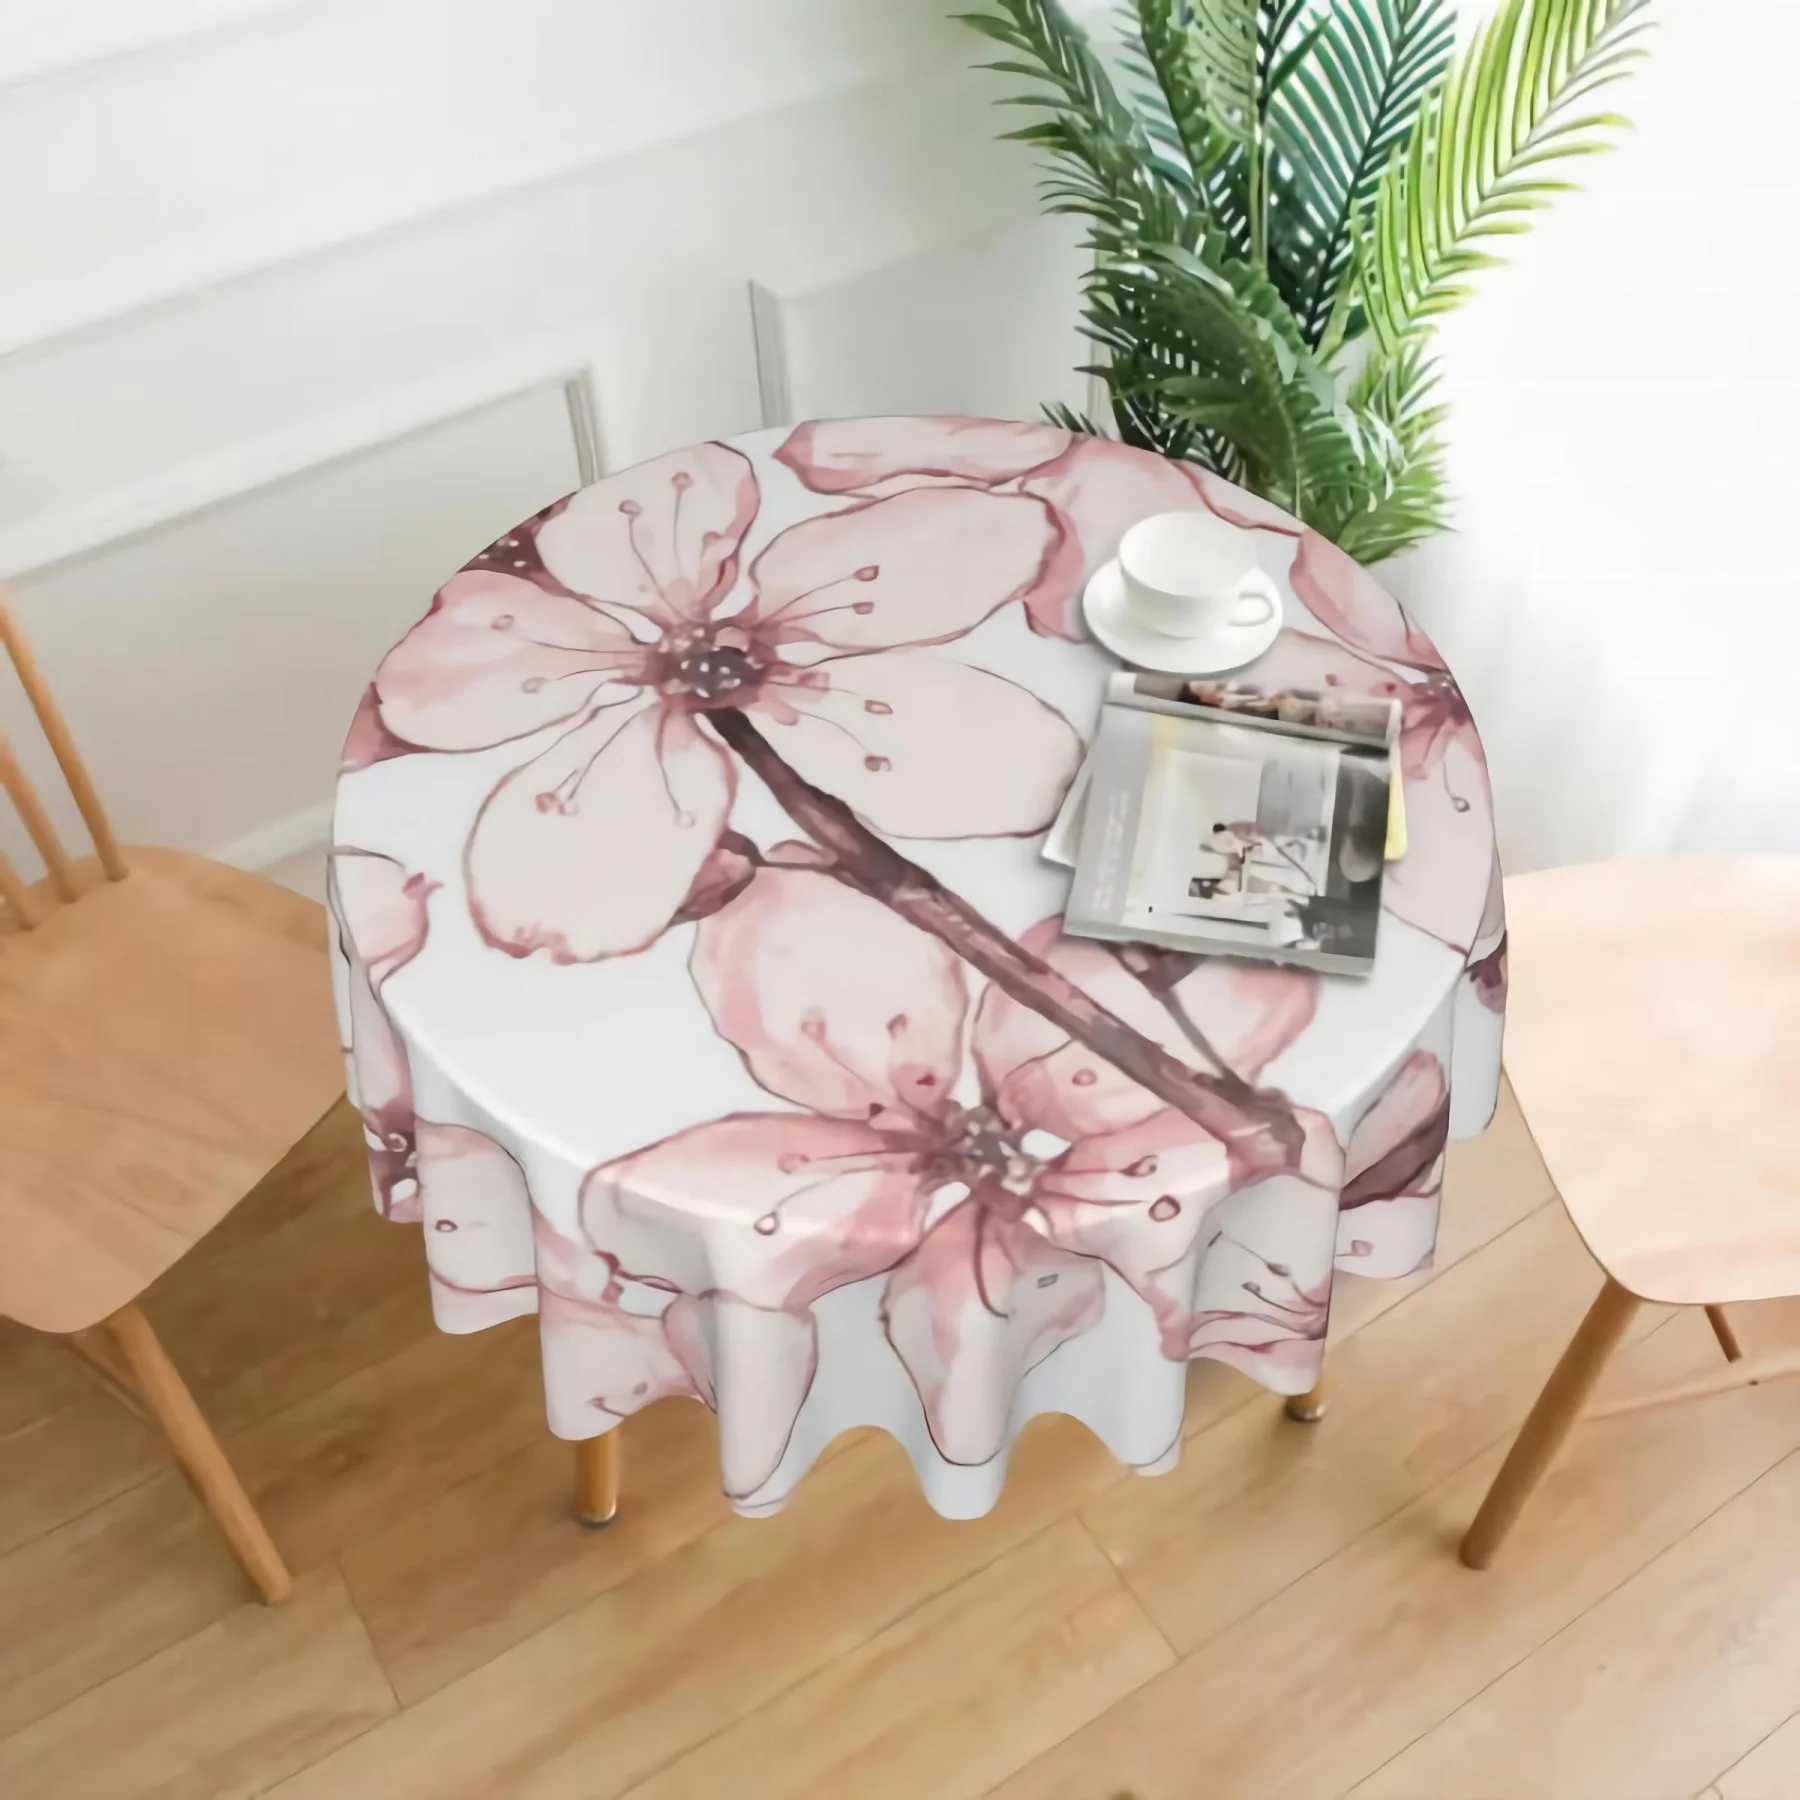 

Cherry Blossom Round Tablecloth Waterproof Reusable Fabric Circle Table Cover for Kitchen Picnic Party Banquet Decor 60 Inch